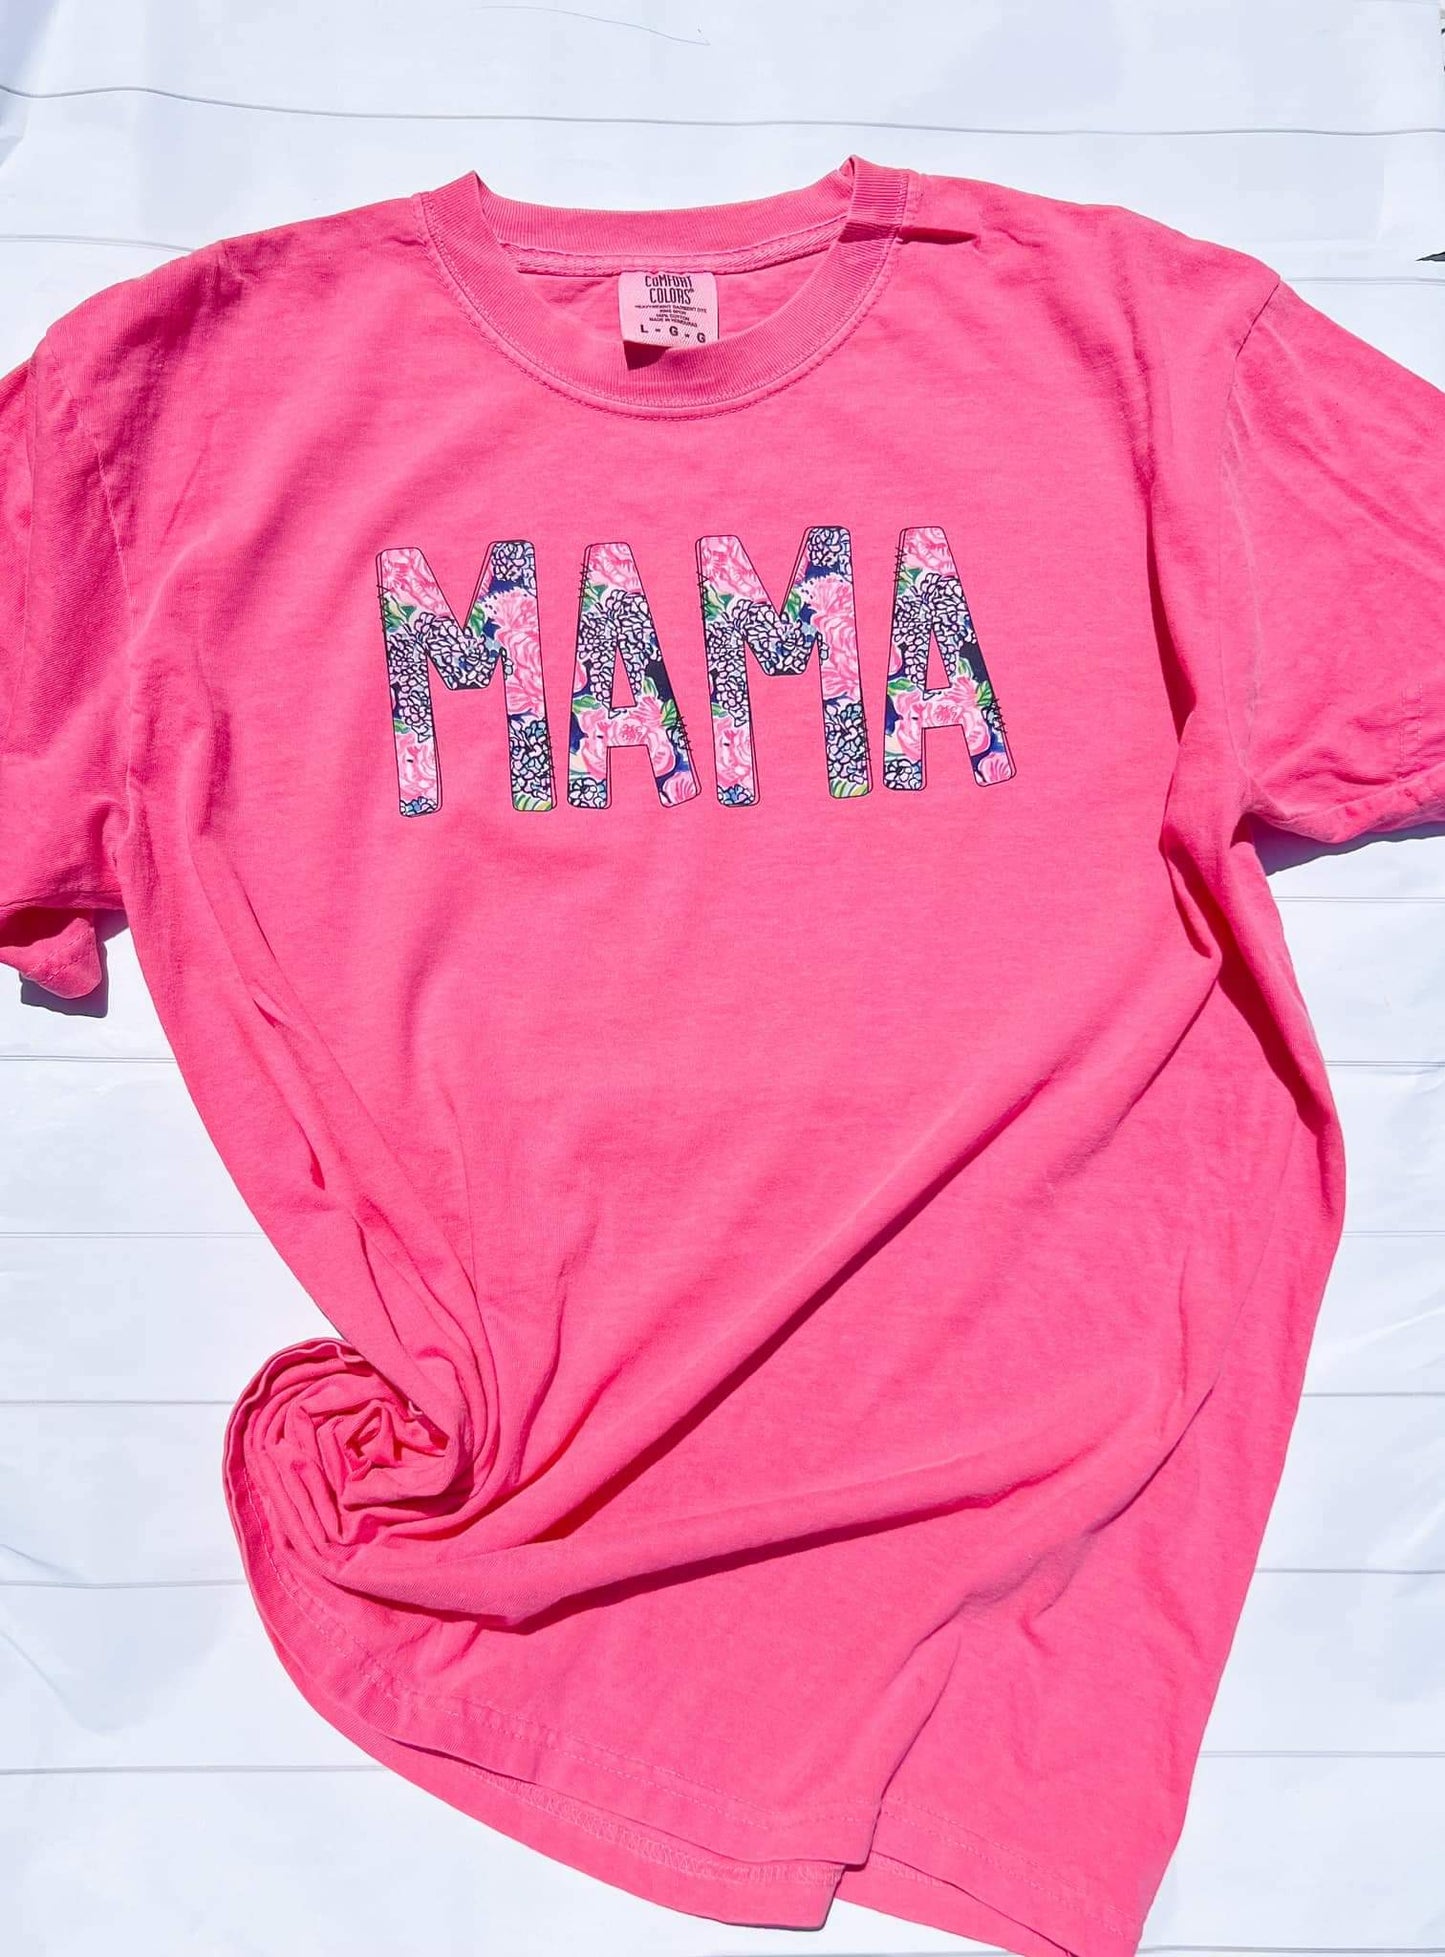 Lily inspired MAMA tee